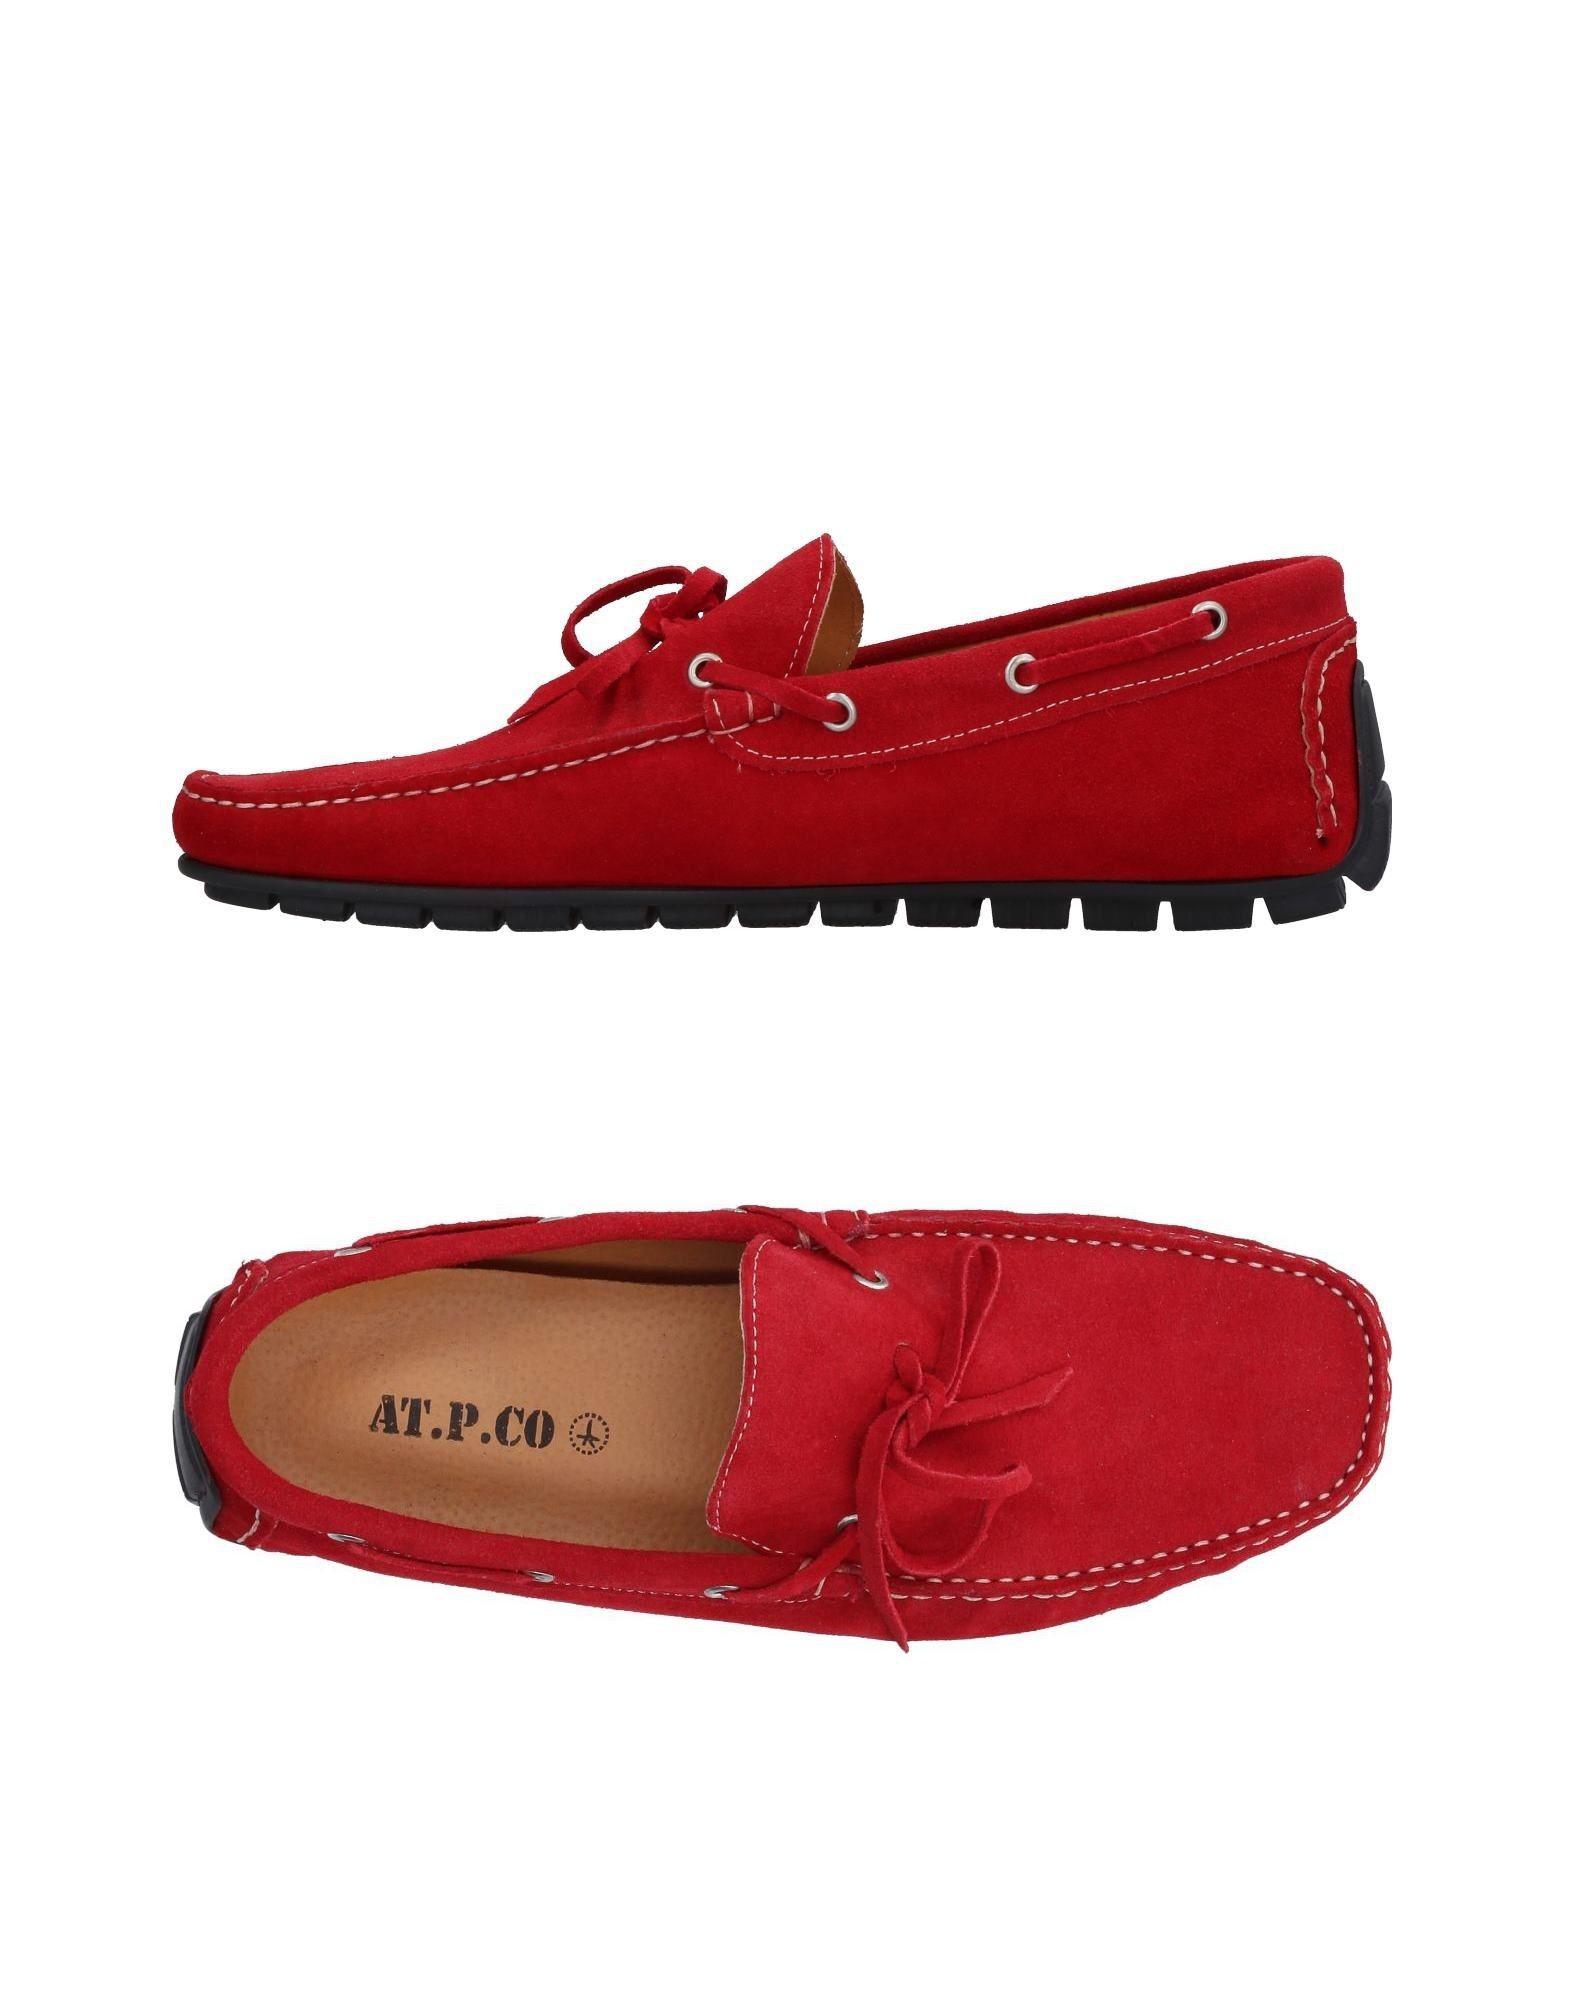 AT.P.CO Loafer in Red for Men - Lyst